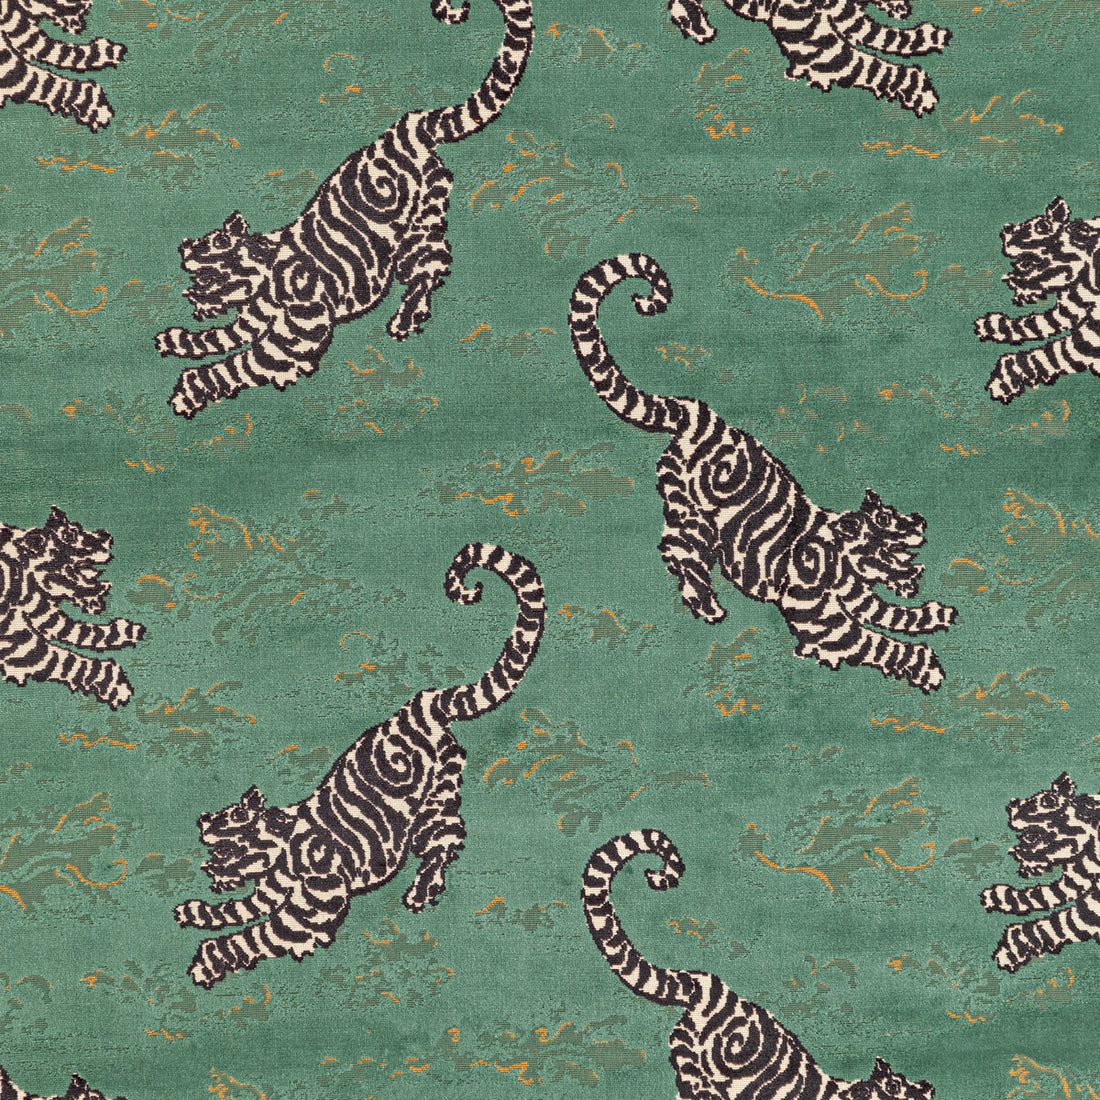 Bongol Velvet fabric in jade color - pattern 2020200.348.0 - by Lee Jofa in the Mindoro collection